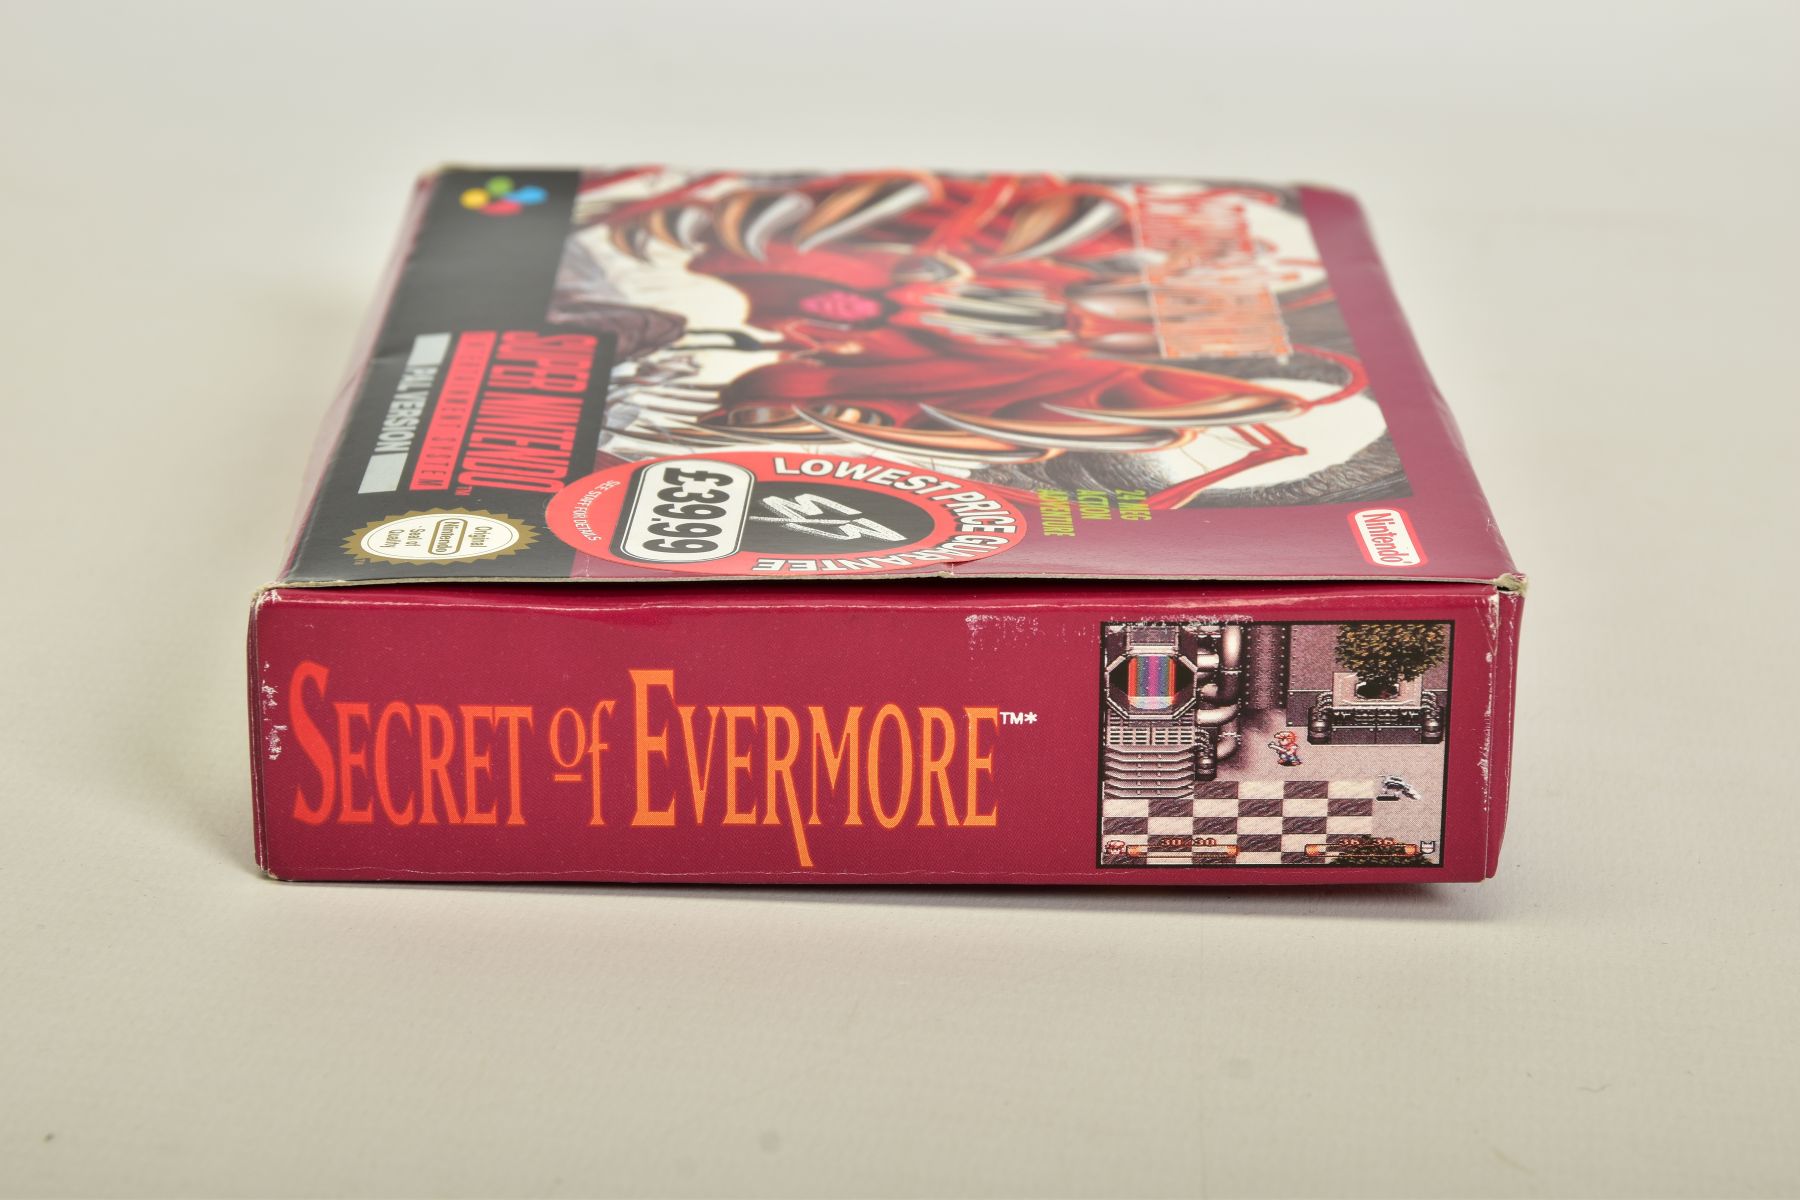 SECRET OF EVEMORE SNES GAME BOXED, SquareSoft developed RPG for the SNES boxed with its manual; - Image 6 of 8